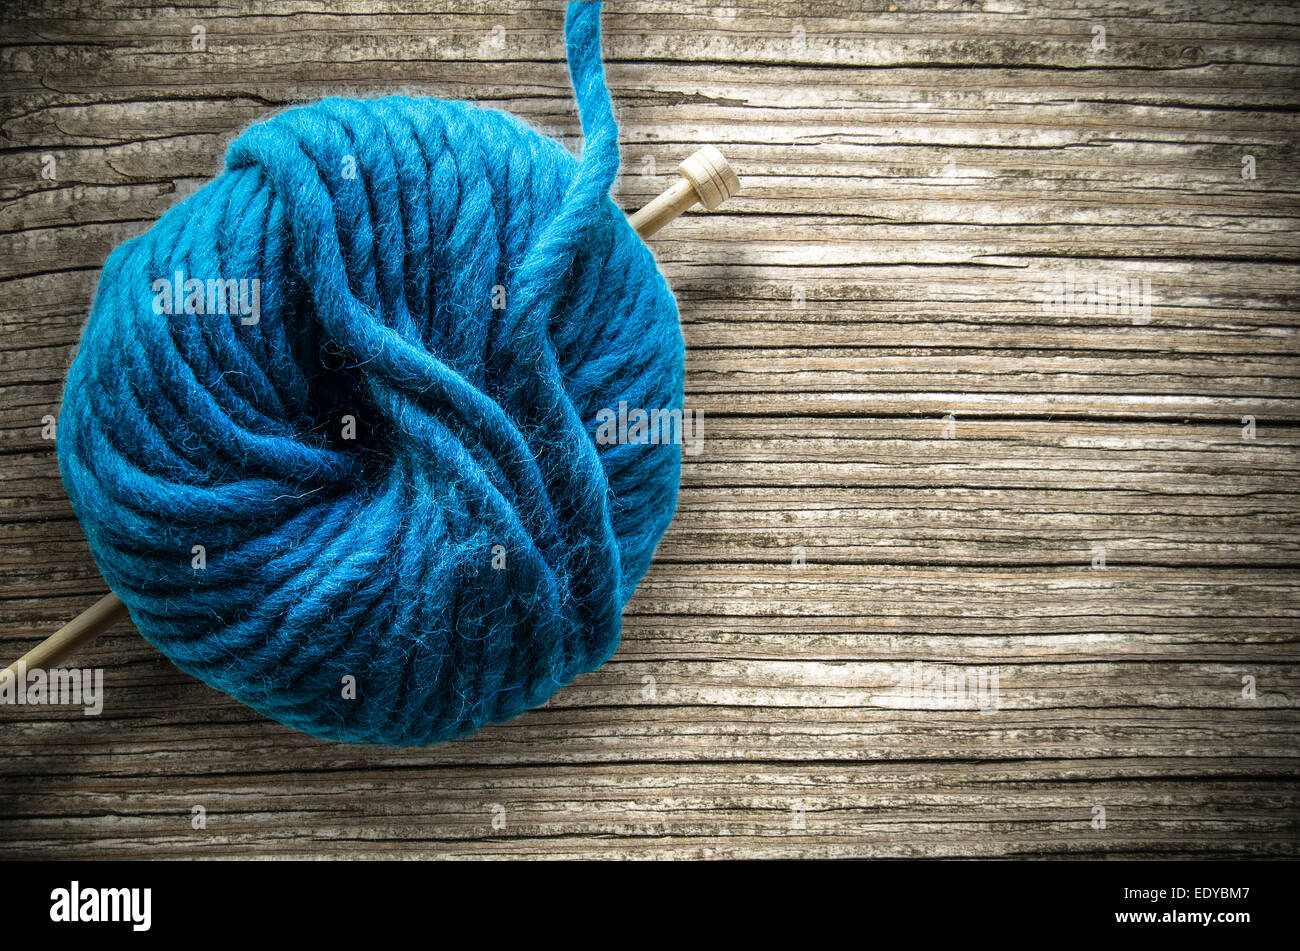 Ball Of Wool And Knitting Needle On A Wooden Table Stock Photo